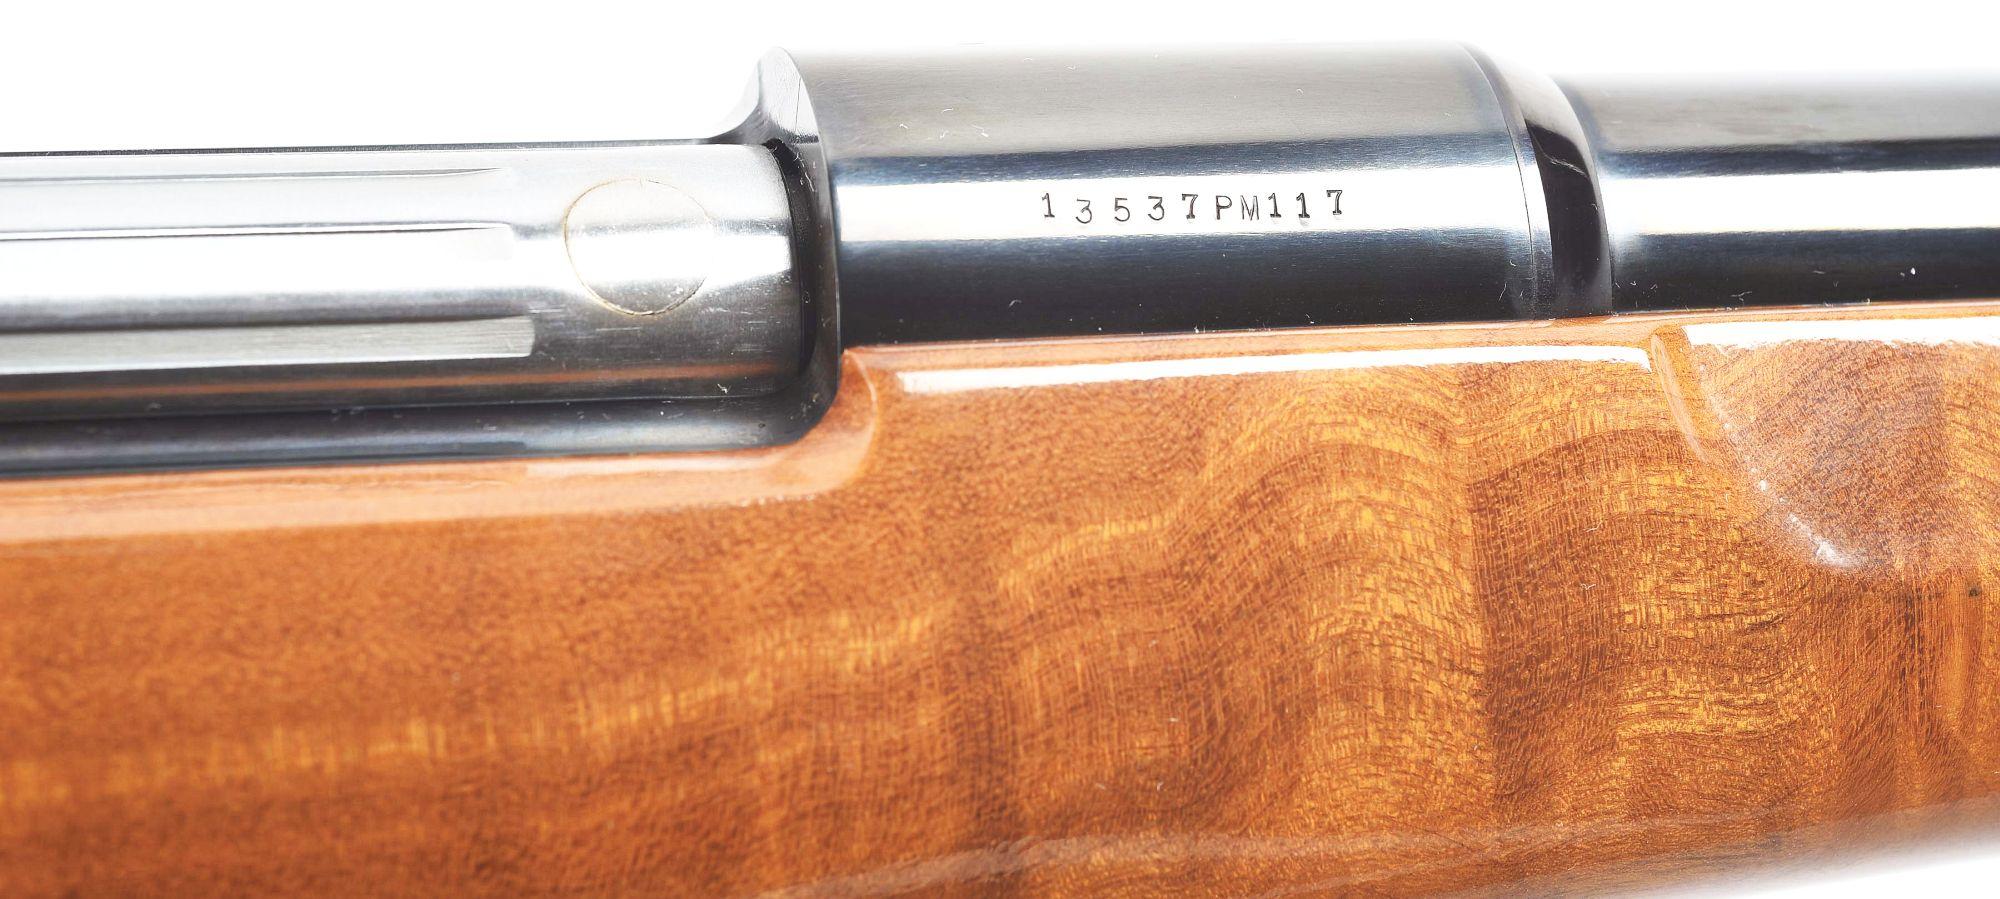 (M) BROWNING BBR BOLT ACTION RIFLE WITH MYRTLE STOCK.